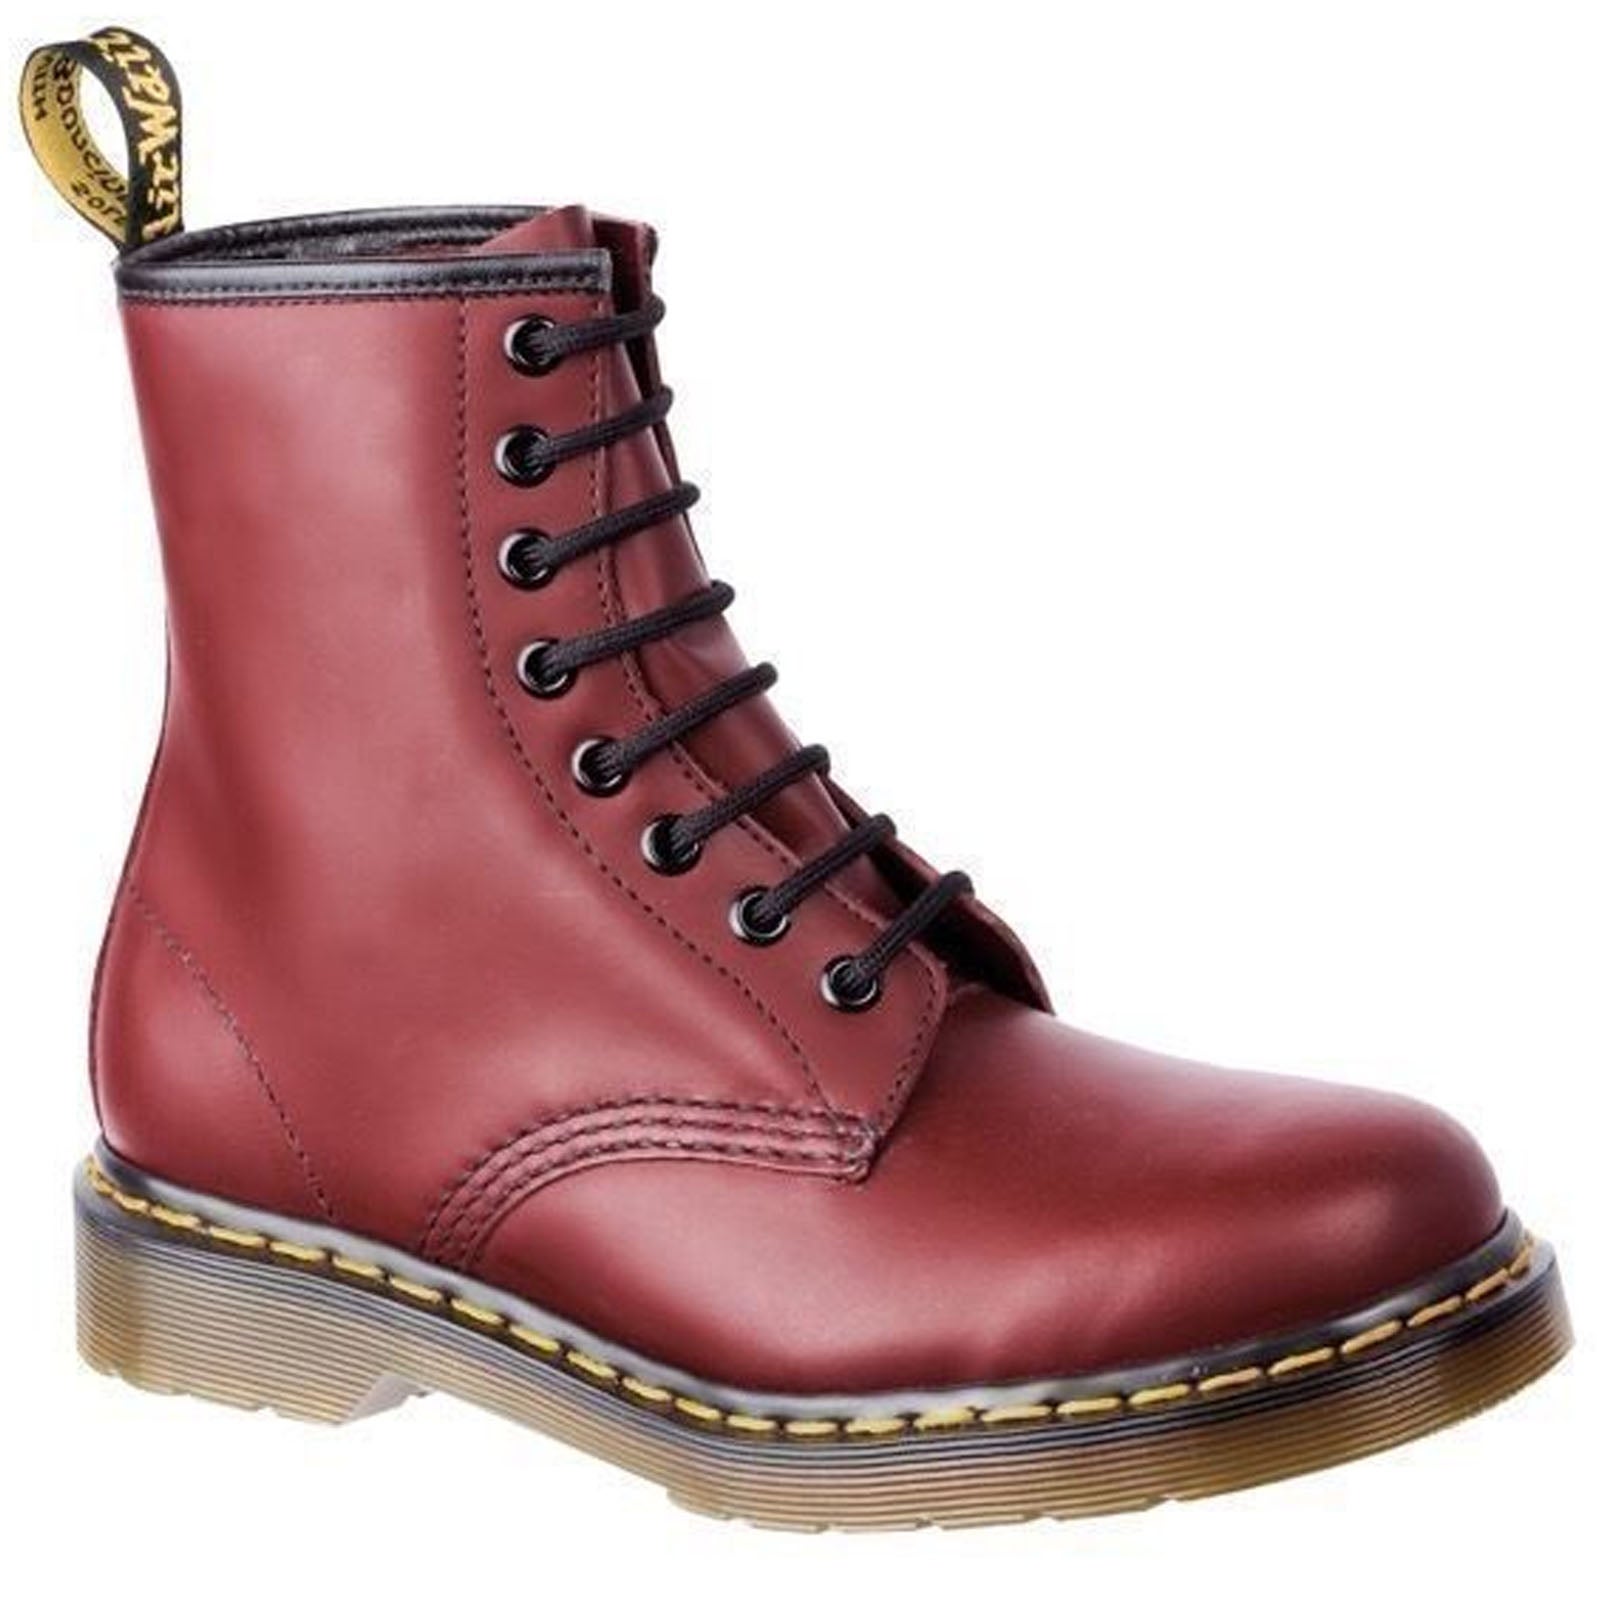 Dr. Martens Unisex 1460Z DMC 8 Lace Up Cherry Red Smooth Leather Boots Shoes Doc